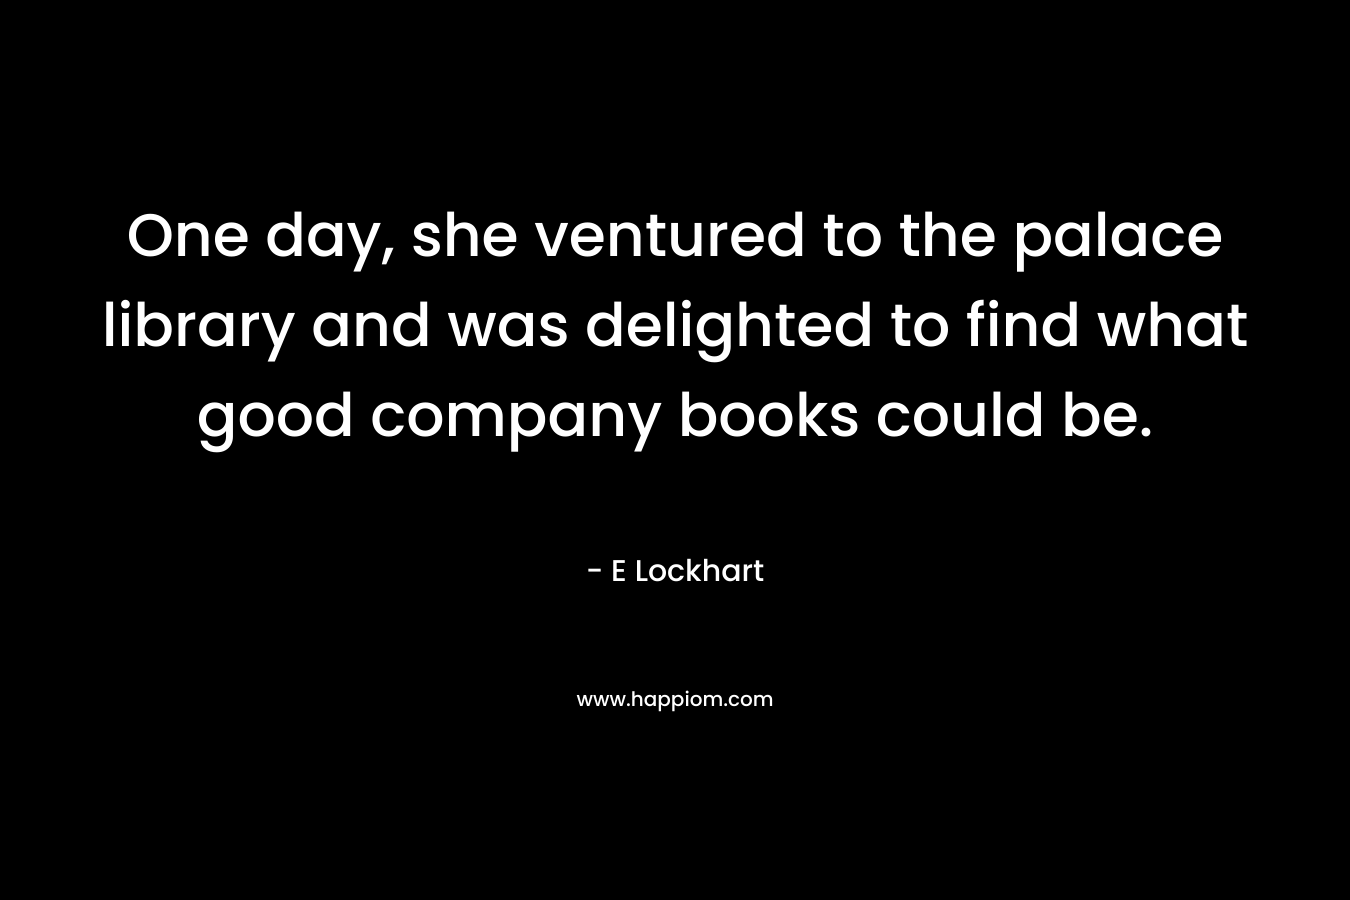 One day, she ventured to the palace library and was delighted to find what good company books could be. – E Lockhart